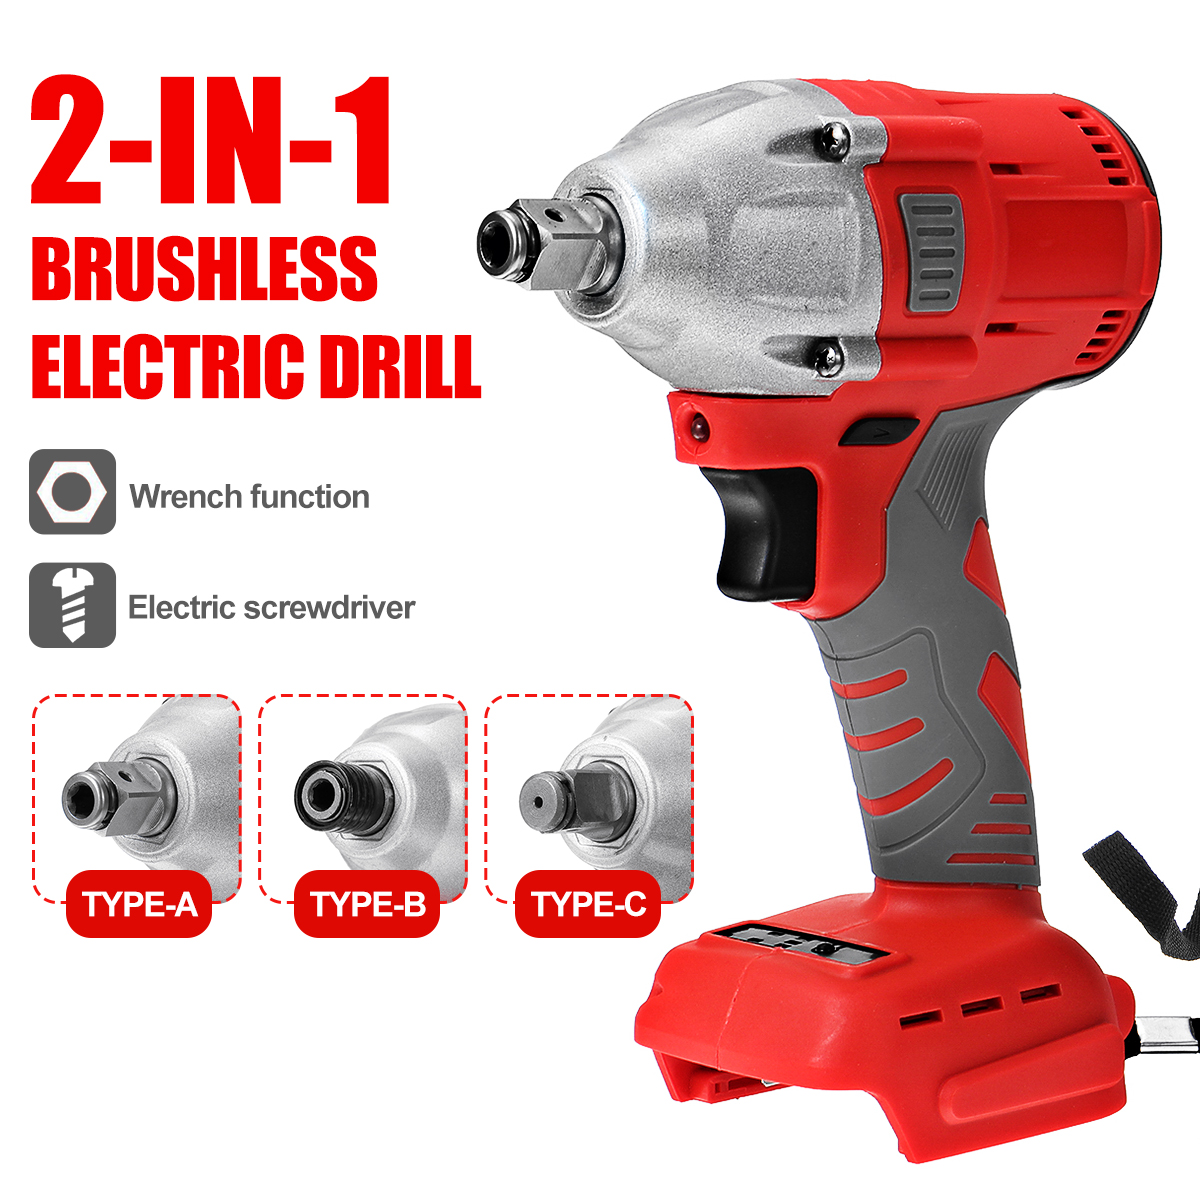 800NM-Brushless-Torque-Wrench-Electric-Screwdriver-Wrench-Cordless-Rechargable-Screw-Driver-Wrench-P-1843516-1